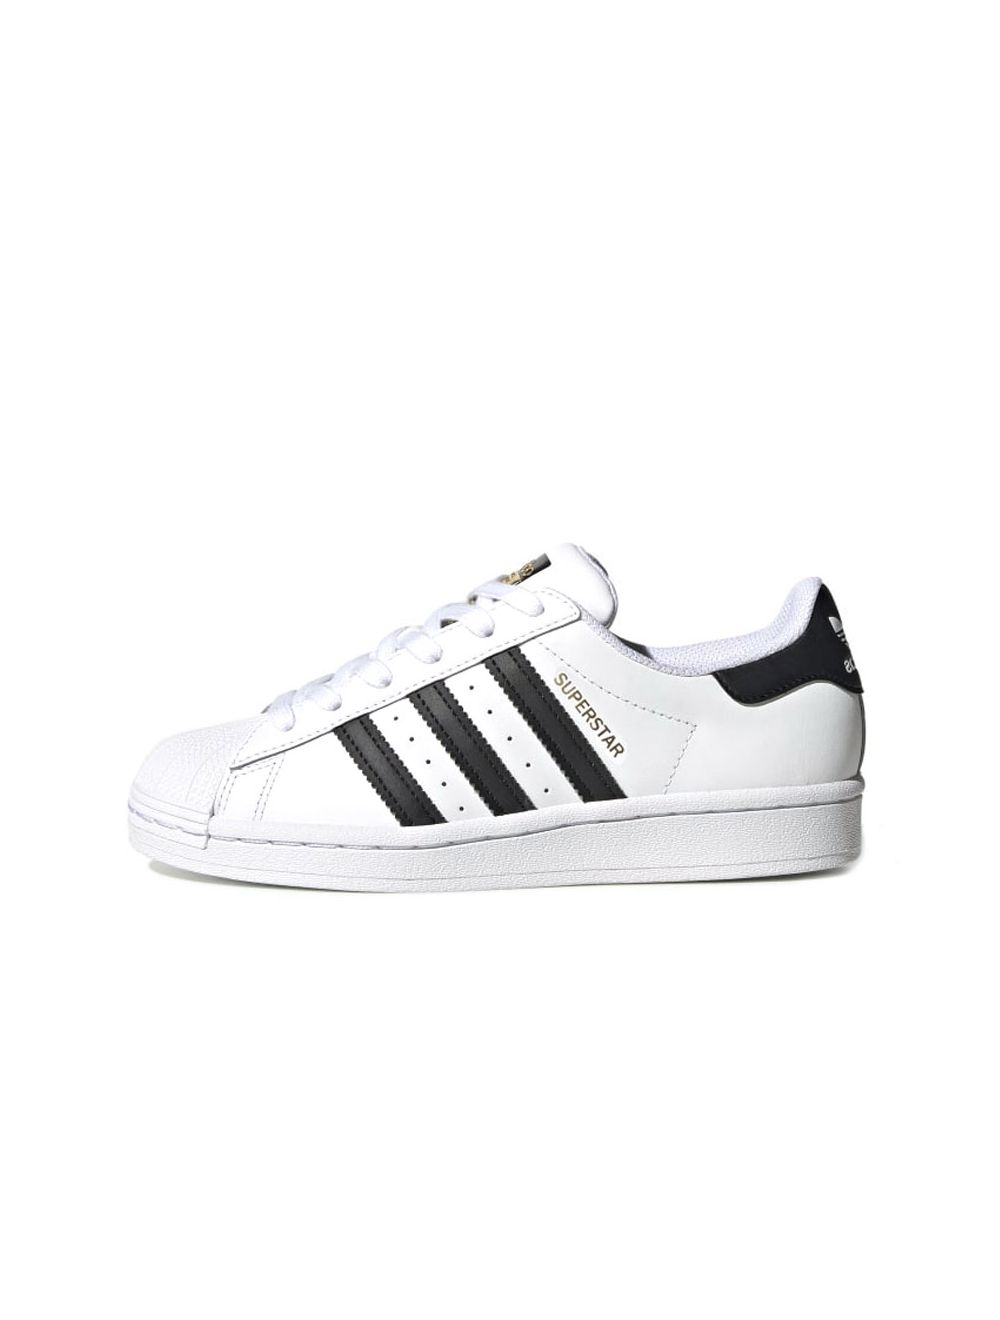 adidas superstar youth white